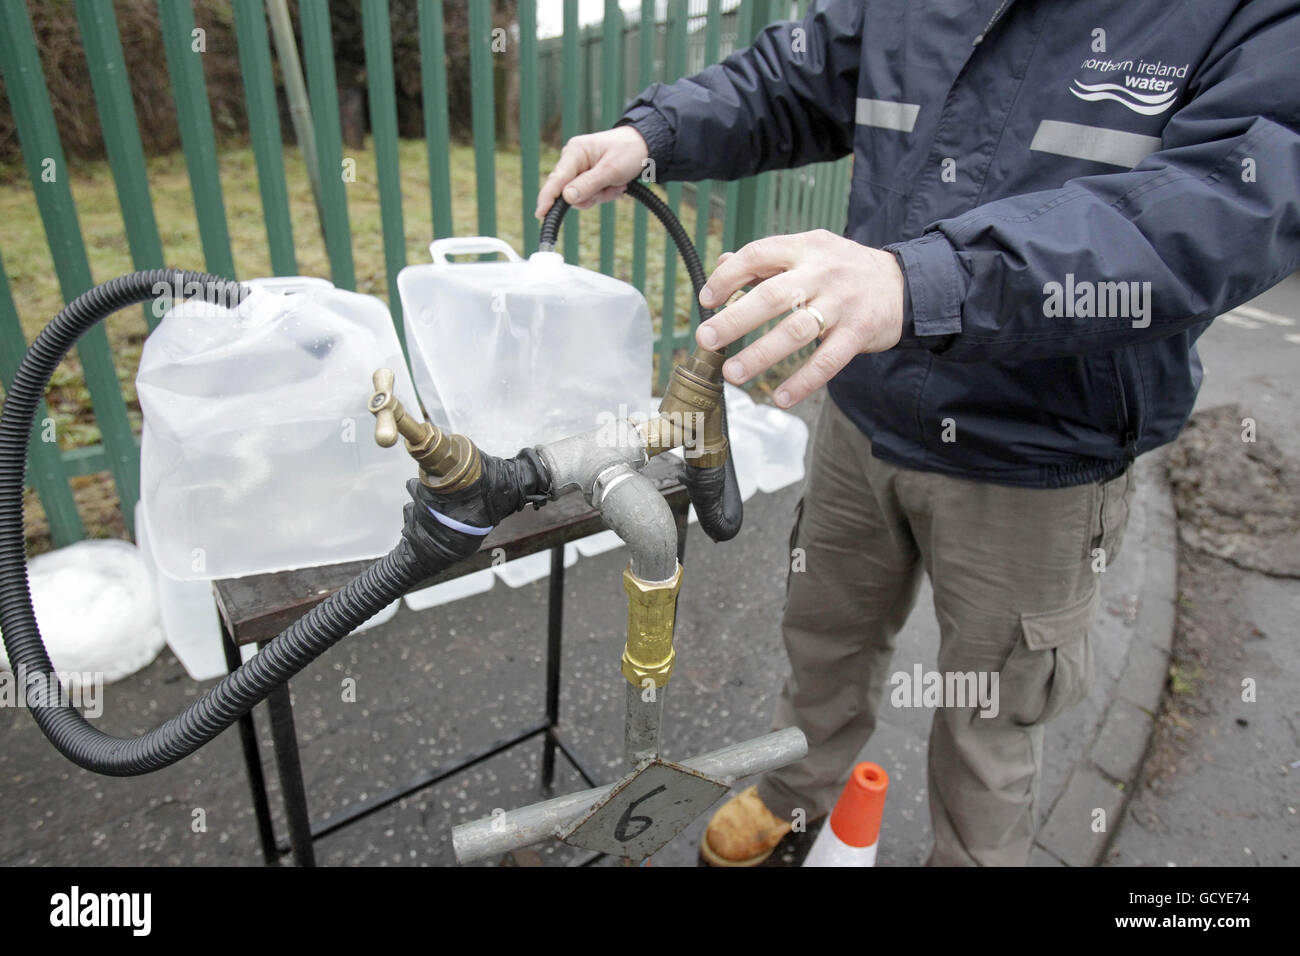 An employee of Northern Ireland Water fills plastic containers for members of the public outside the company's headquarters in North Belfast. Stock Photo